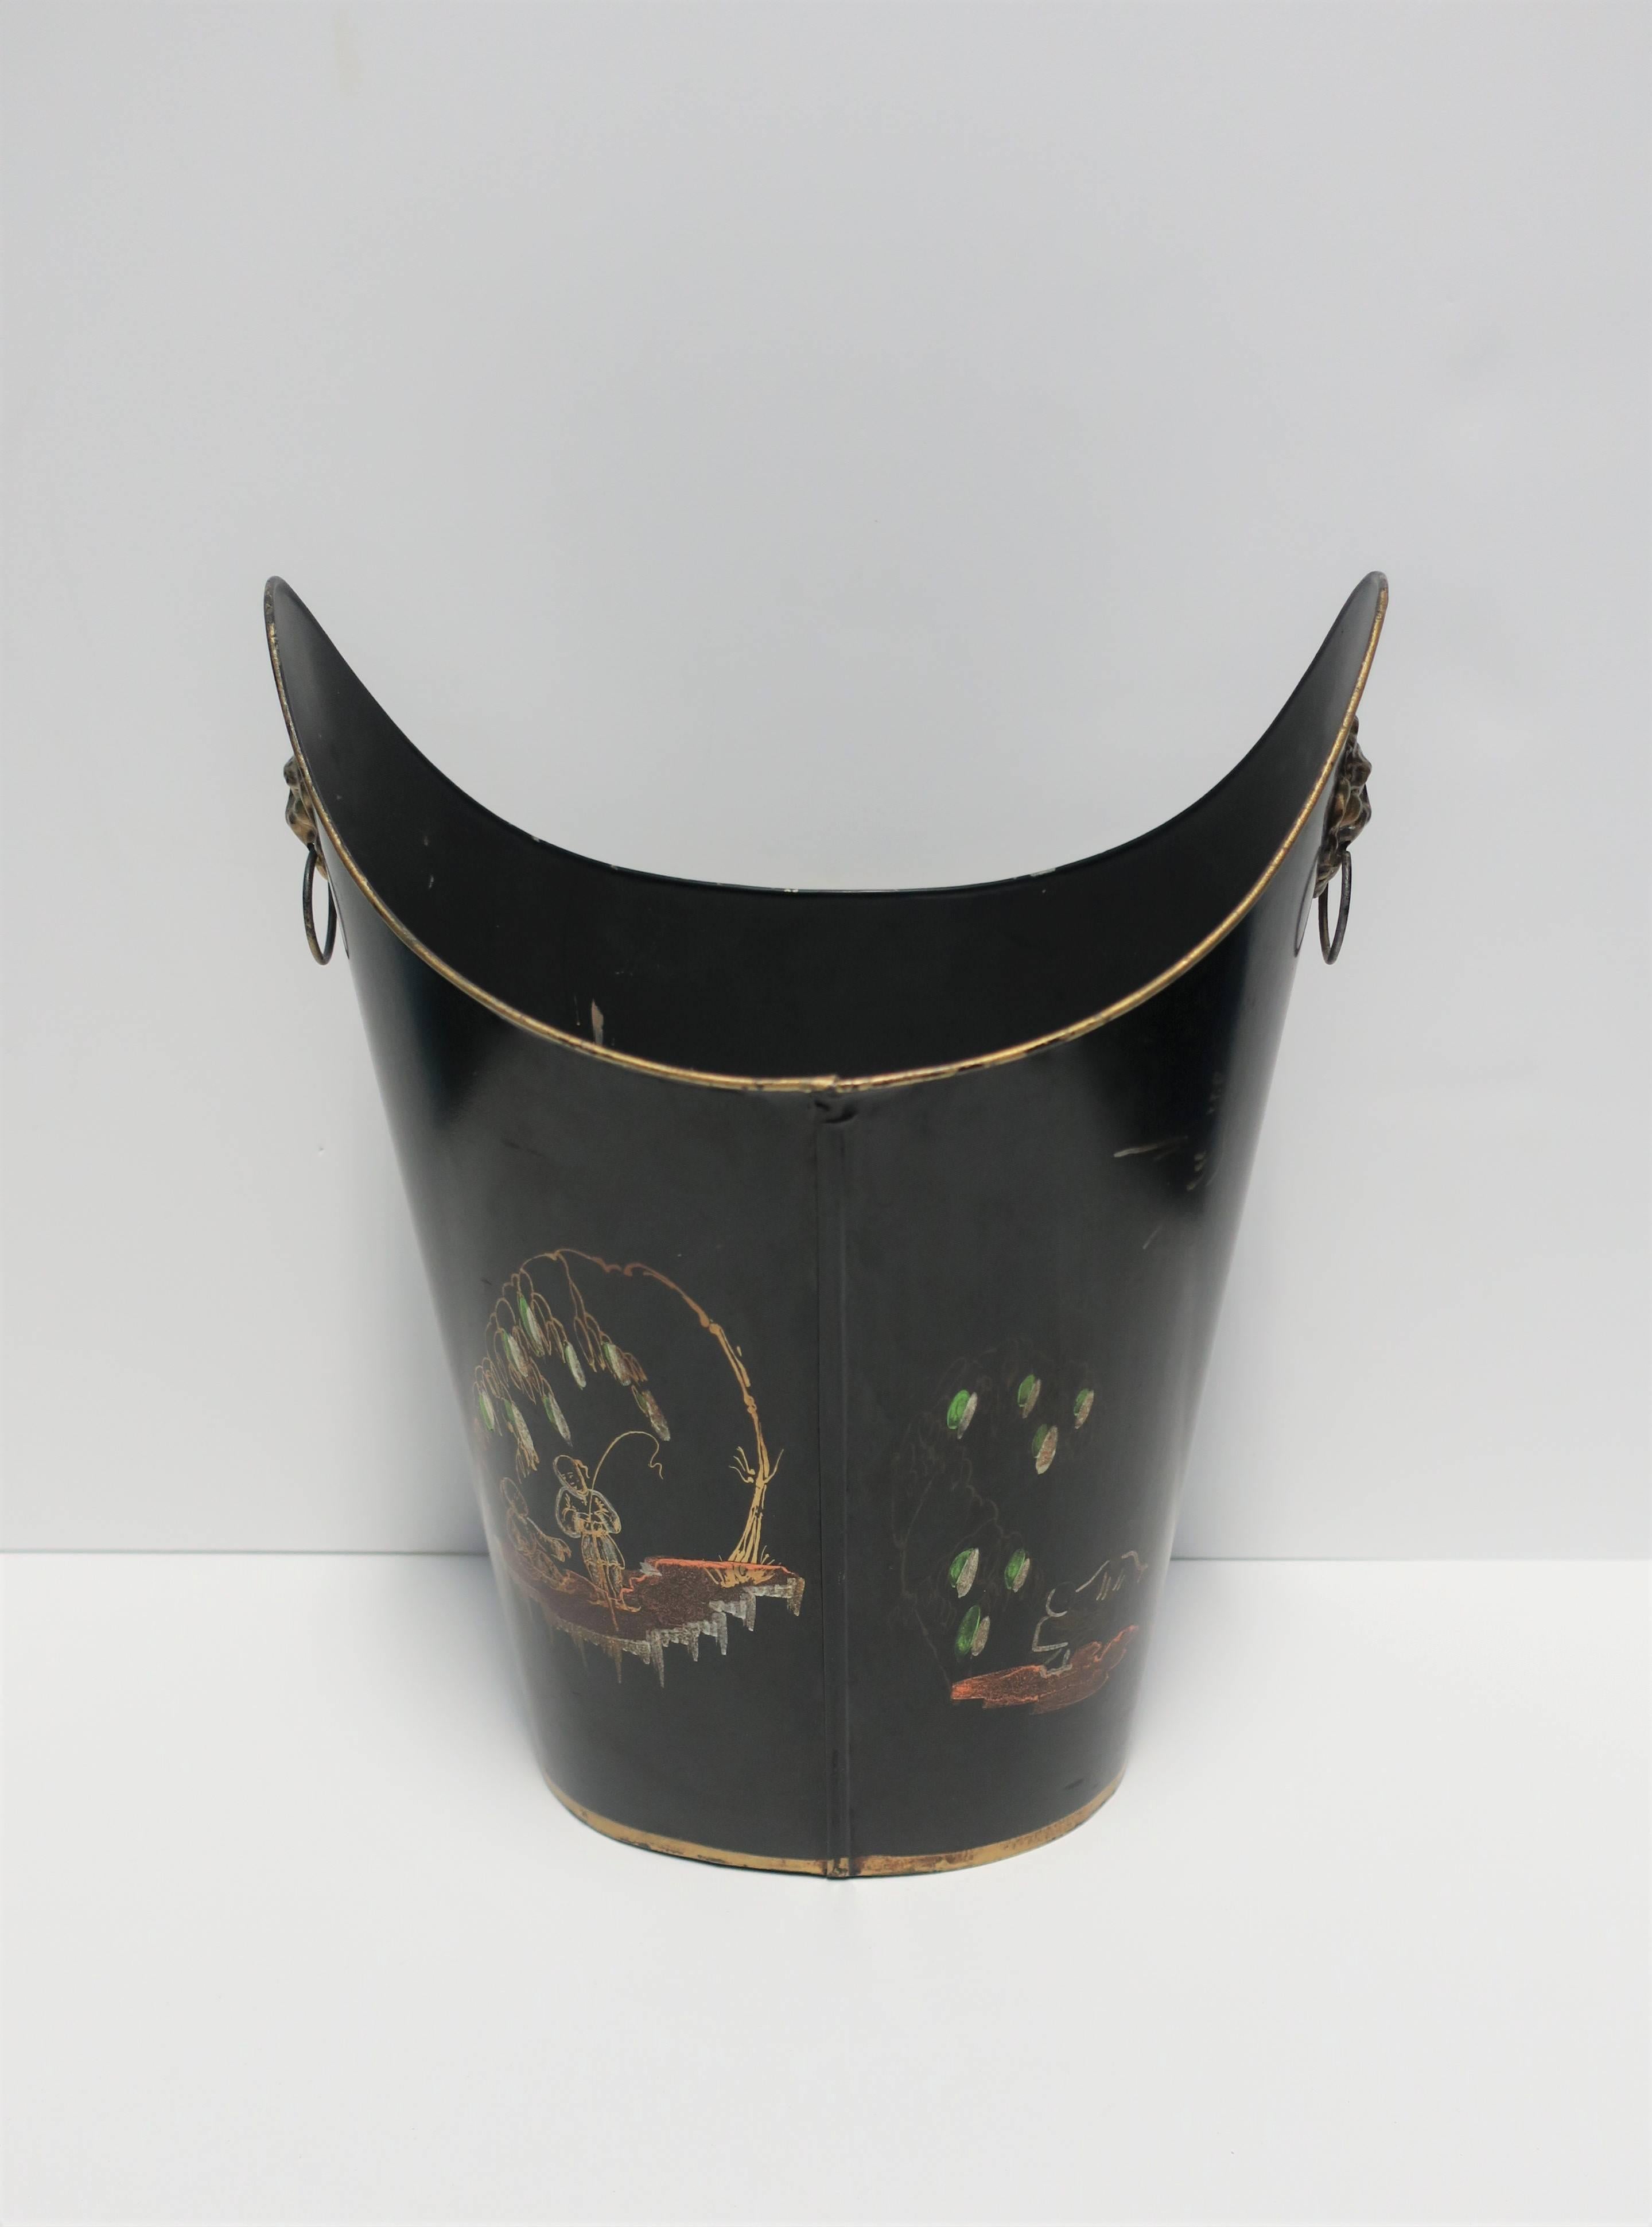 Hand-Painted Italian Black and Gold Wastebasket or Trash Can